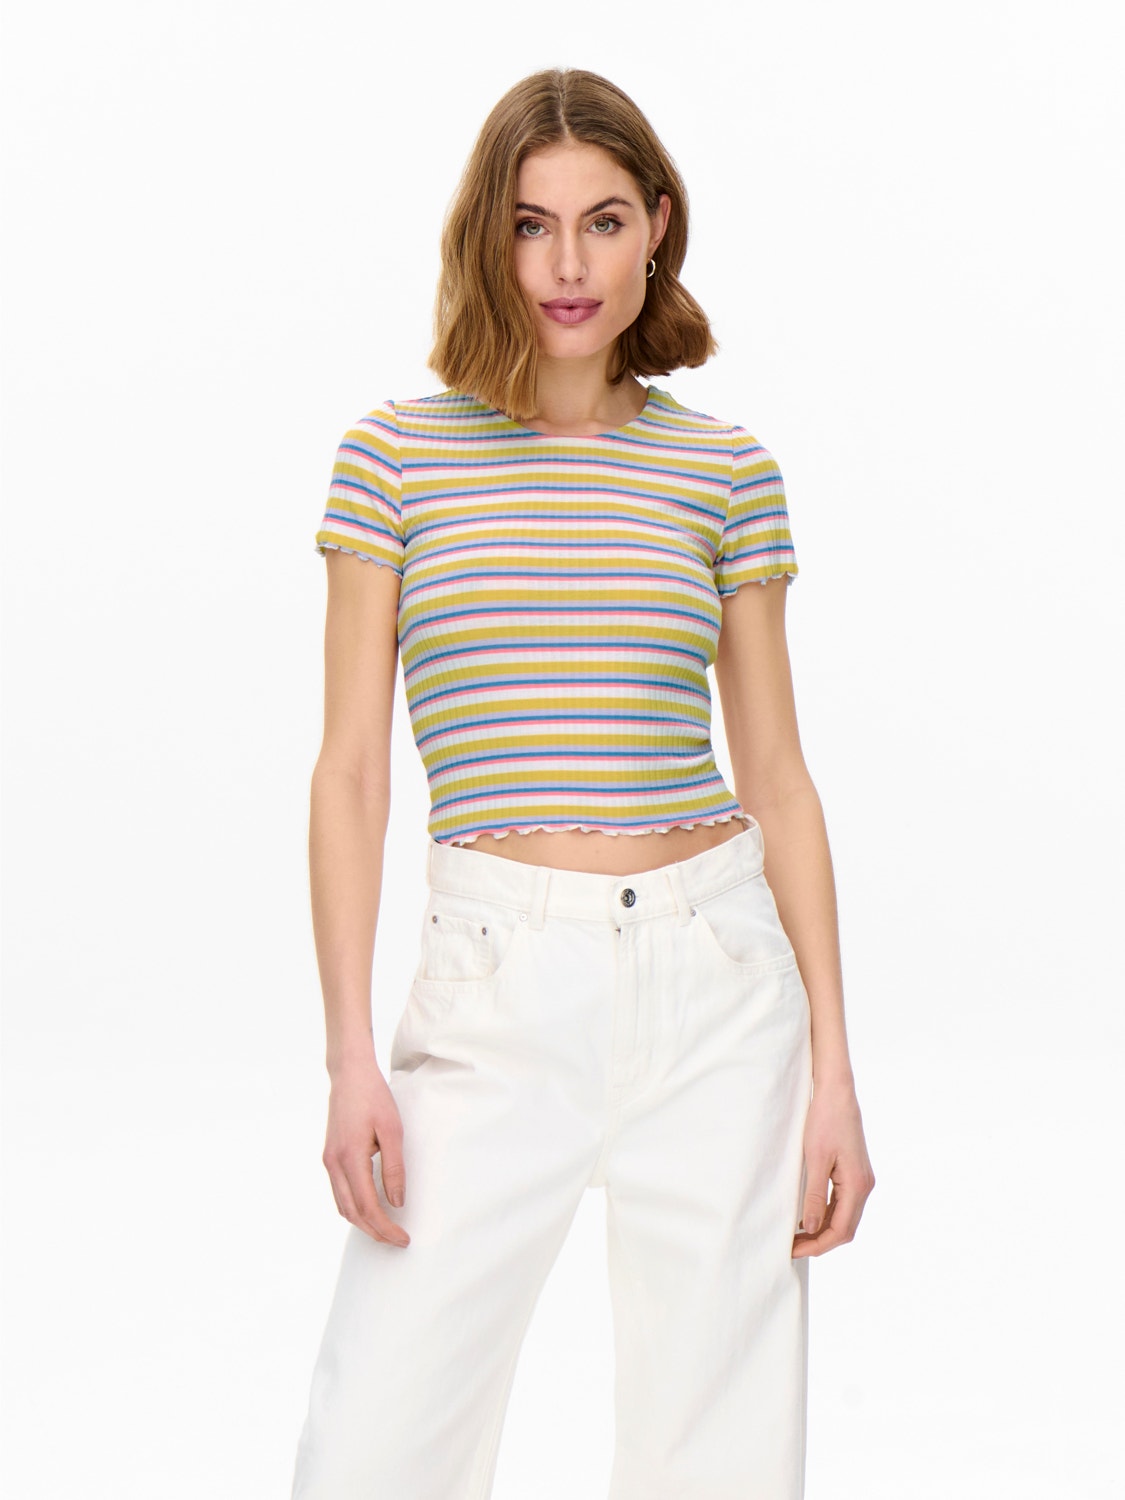 ONLY Gestreept Top -Goldfinch - 15230515